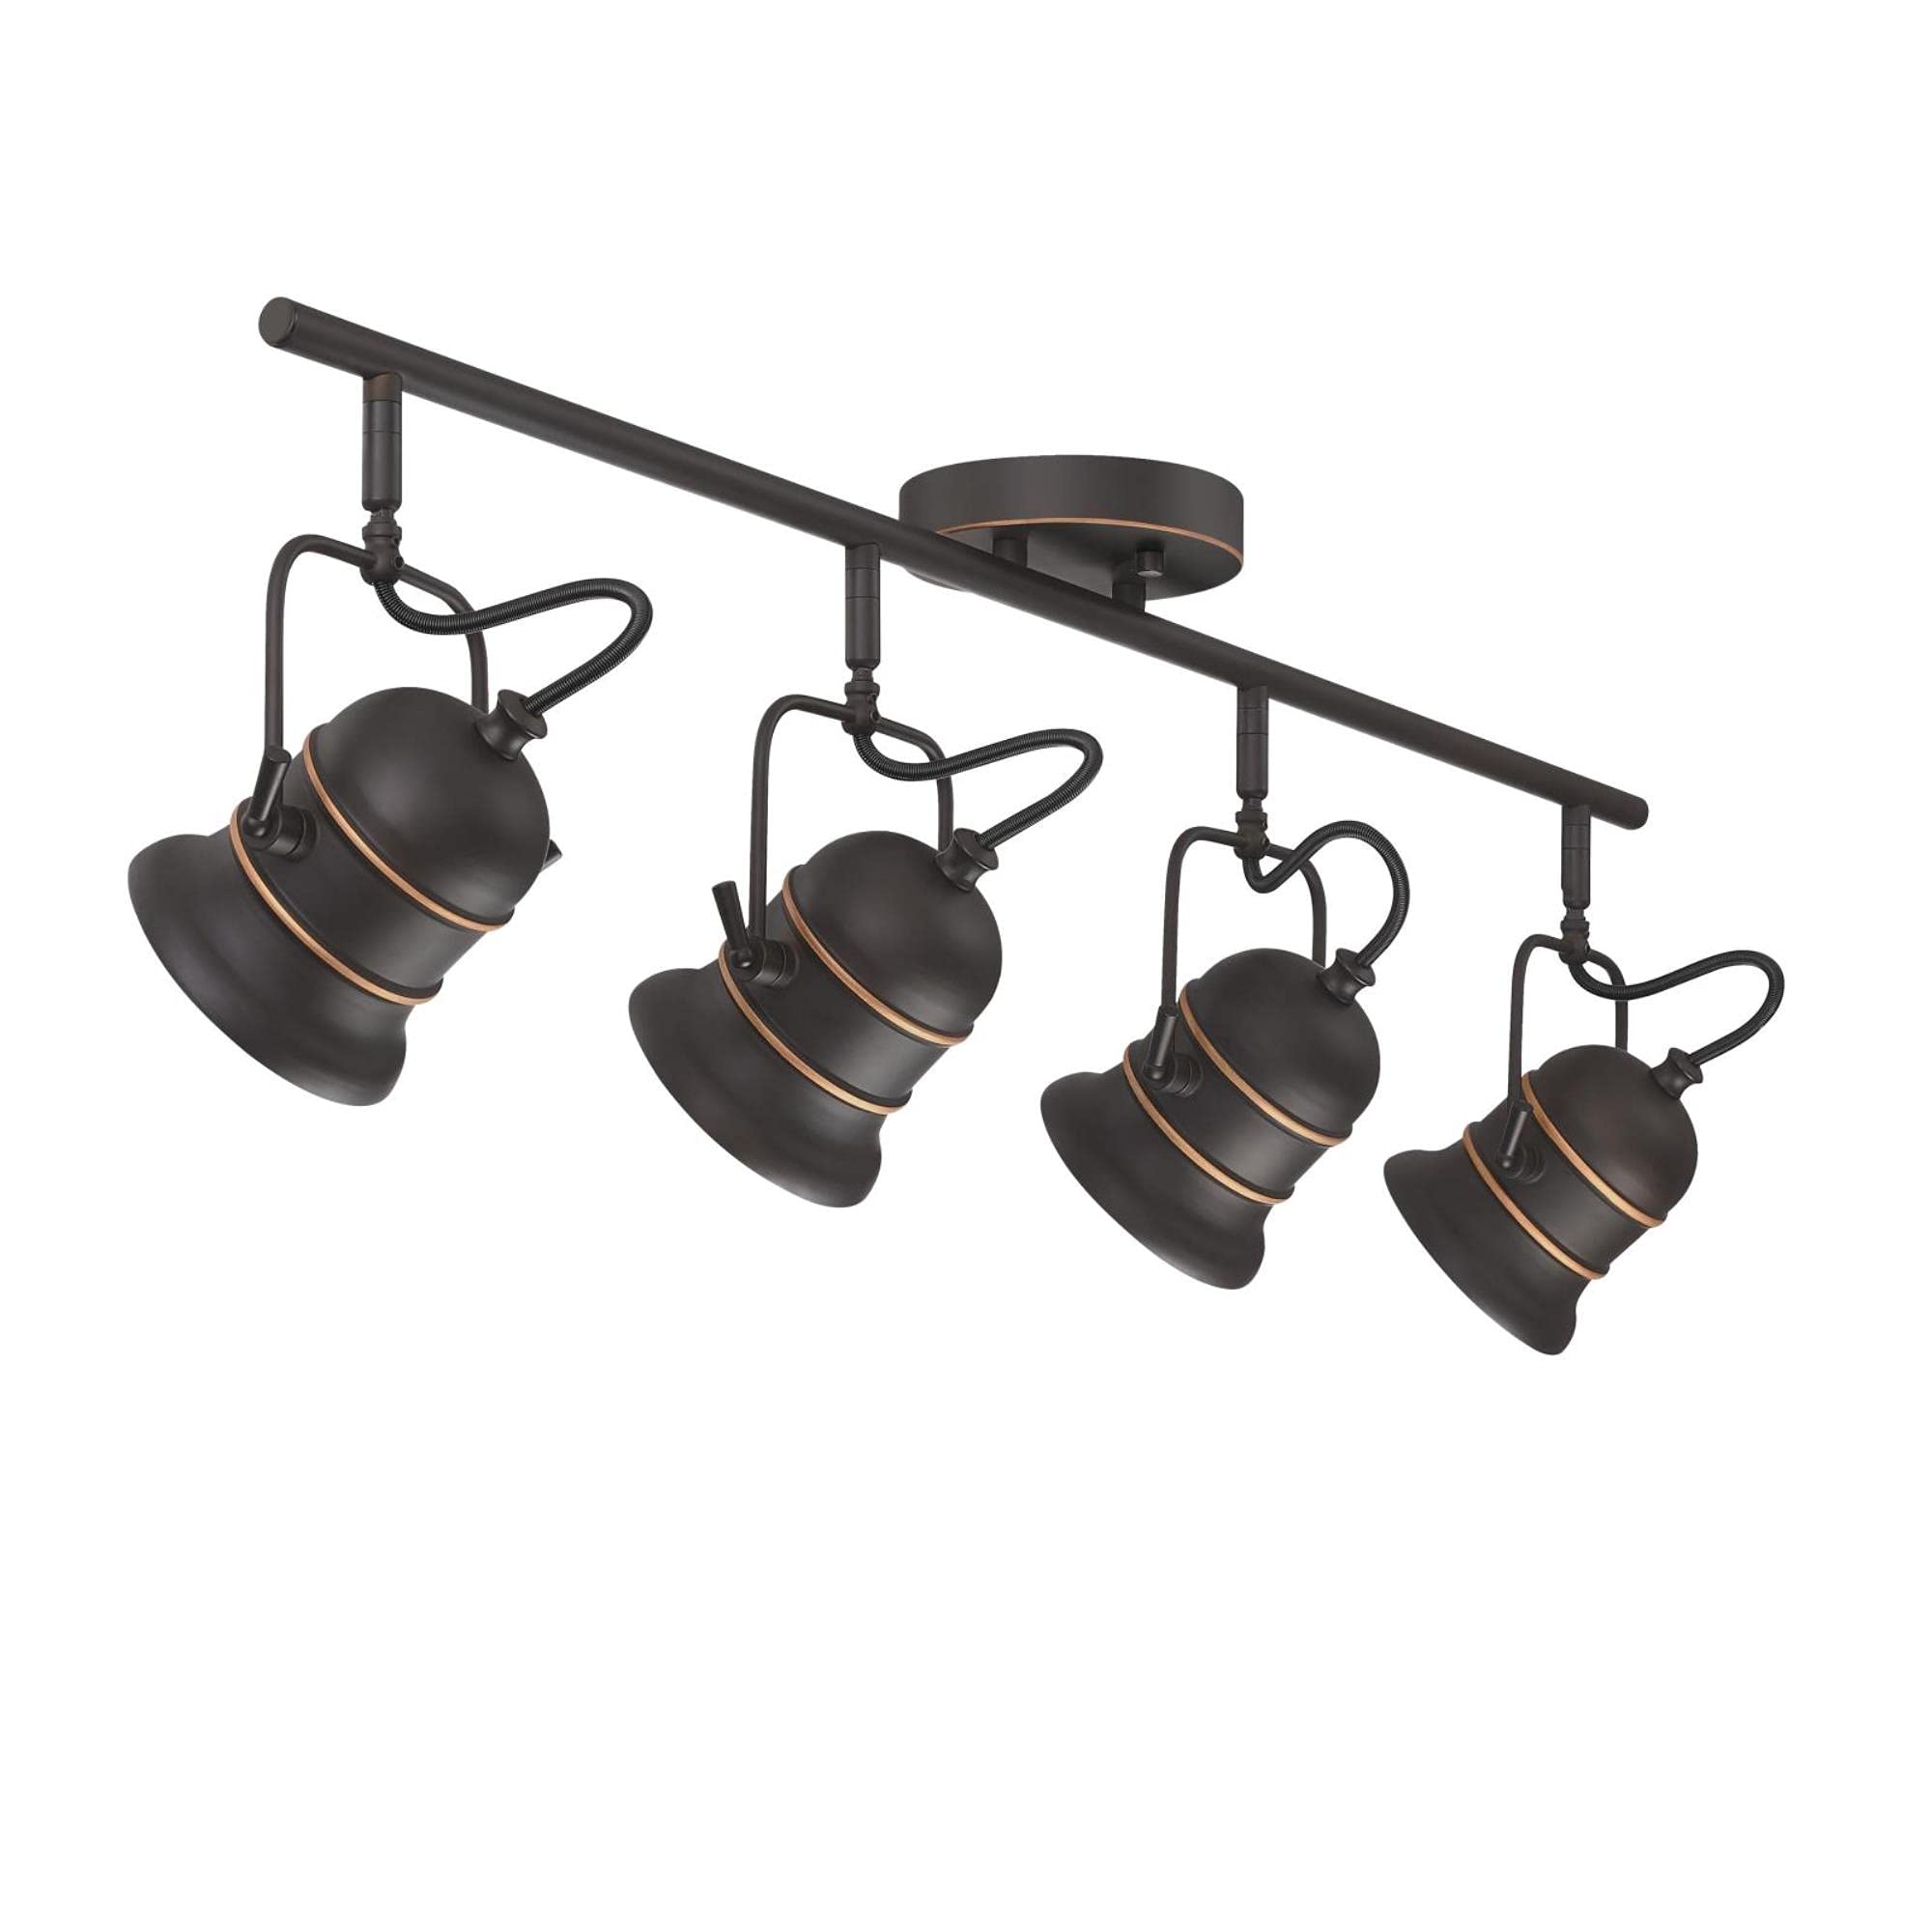 Westinghouse Lighting 6116800 Boswell Vintage-Style Four-Light Indoor Track Light Kit, Oil Rubbed Bronze Finish with Highlights,Metal Shades